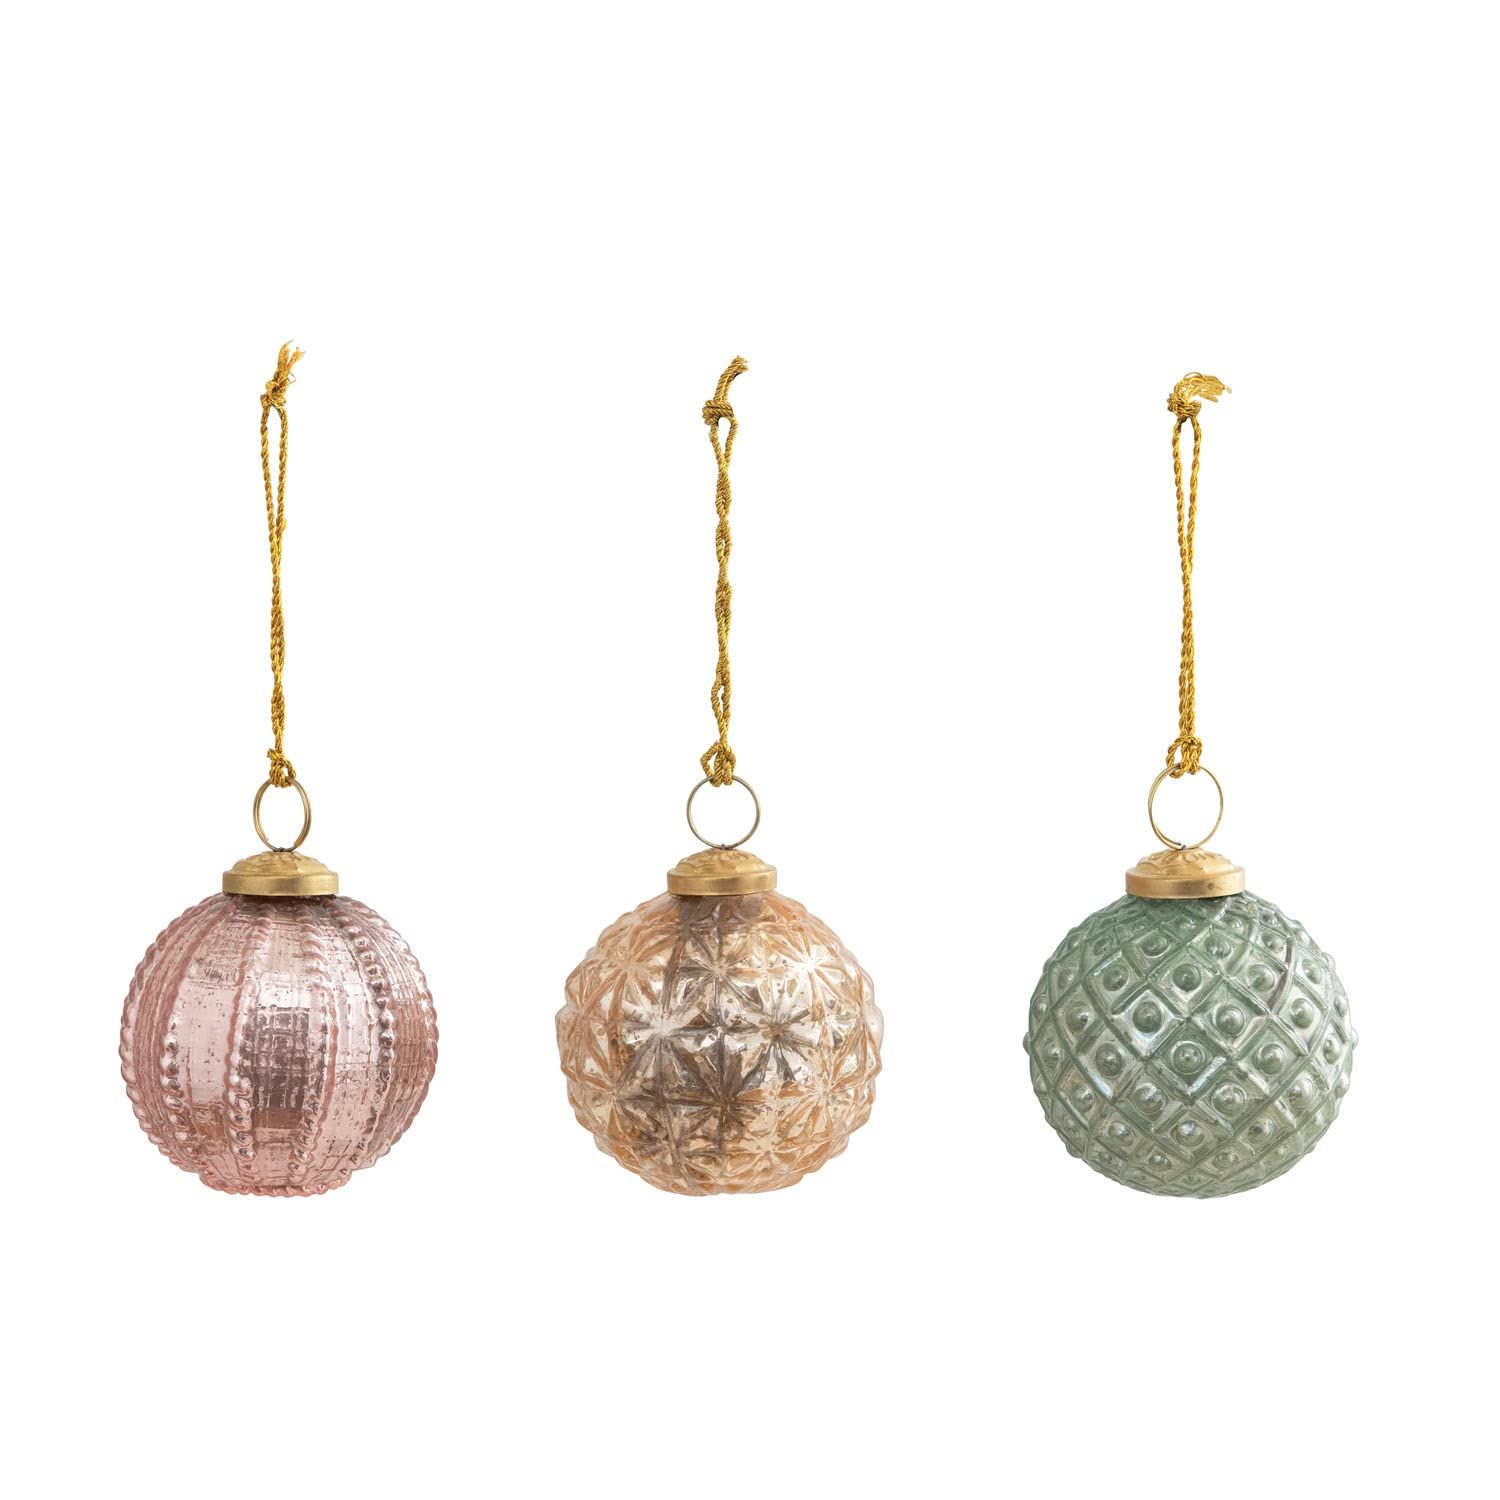 Creative Co-Op Embossed Glass Ornaments in Kraft Box, Pink, Green and Gold Color, Set of 3 | Amazon (US)